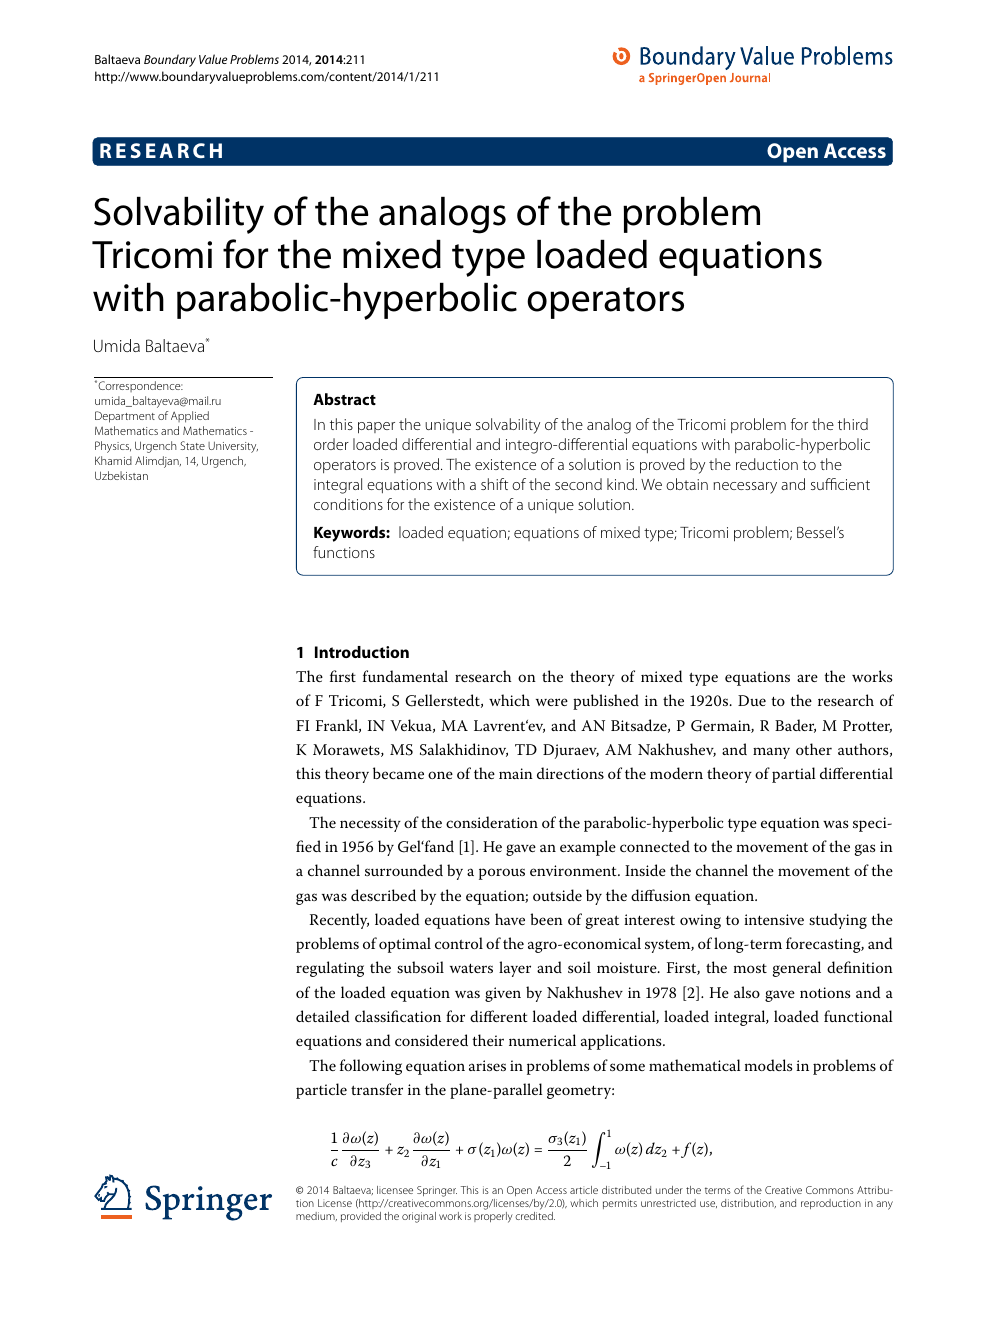 Solvability Of The Analogs Of The Problem Tricomi For The Mixed Type Loaded Equations With Parabolic Hyperbolic Operators Topic Of Research Paper In Mathematics Download Scholarly Article Pdf And Read For Free